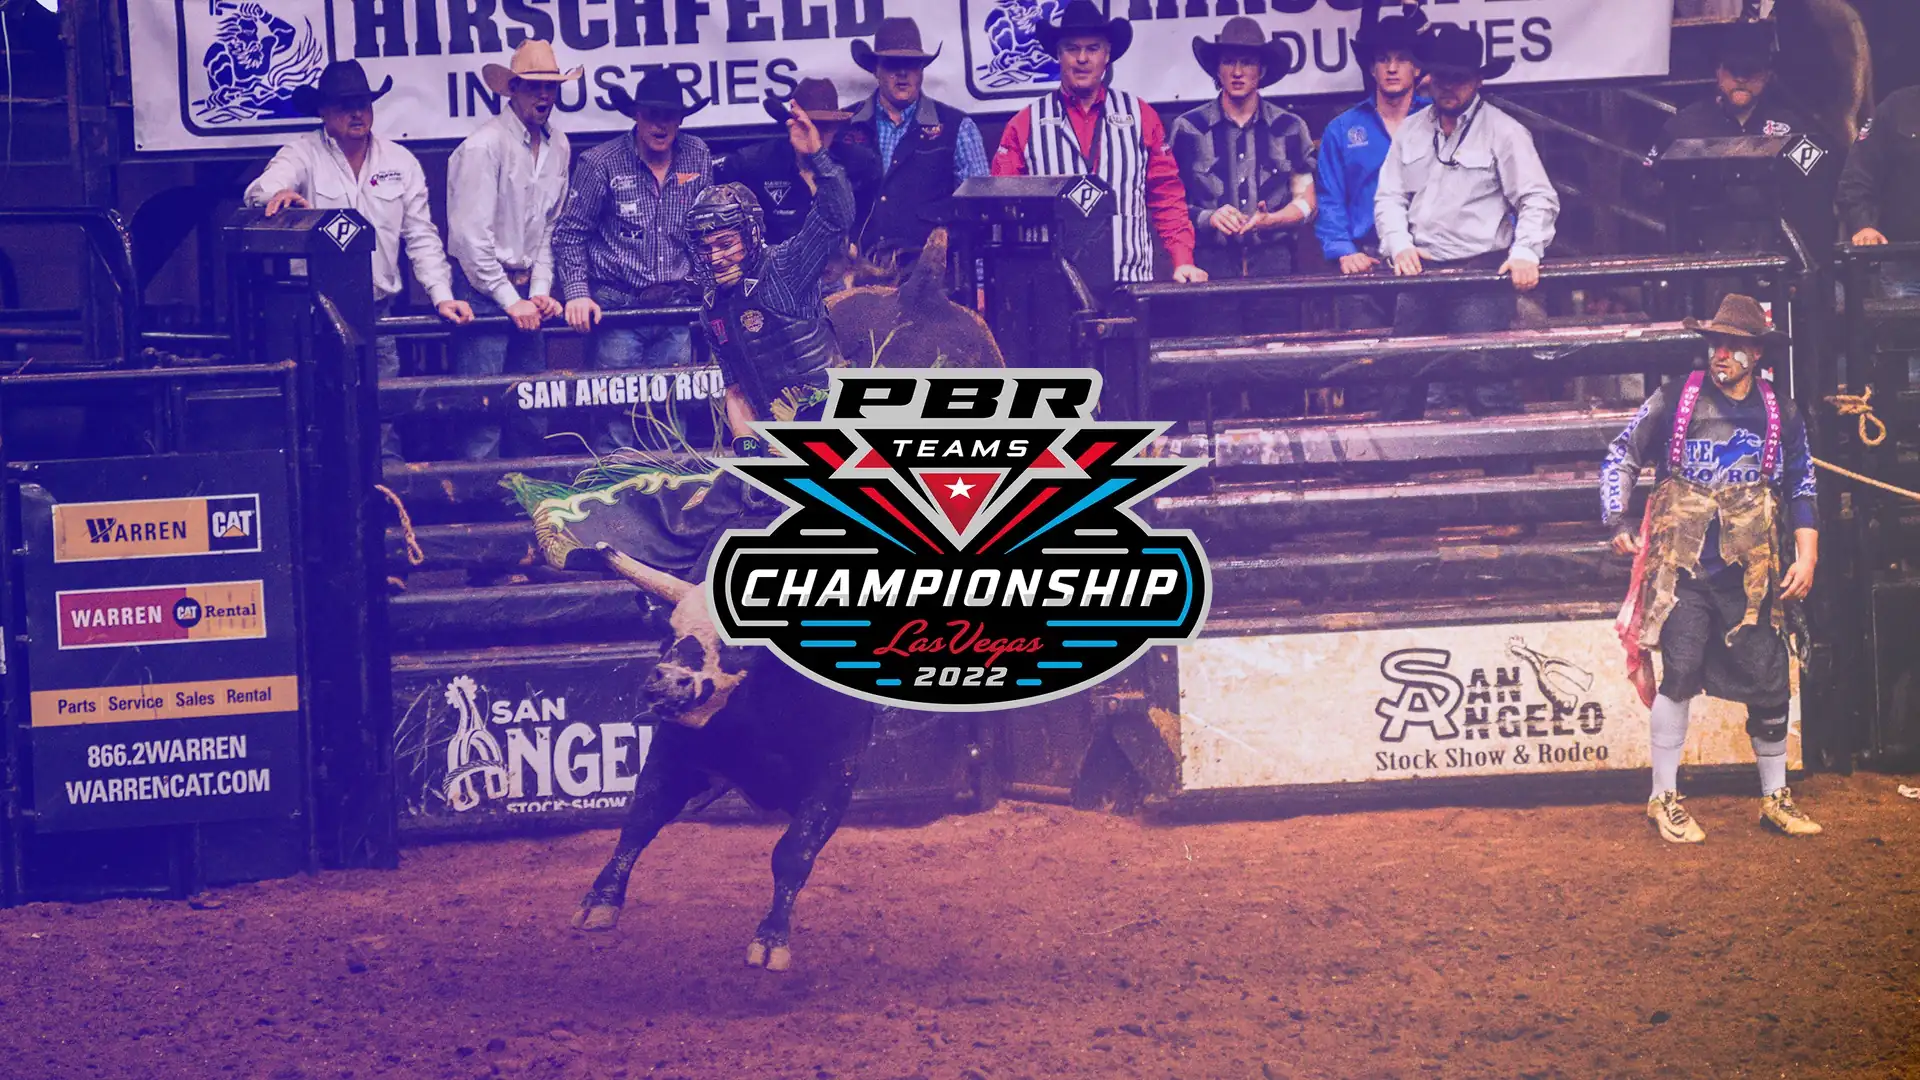 PBR Team Series Championship logo in front of PBR riding scene